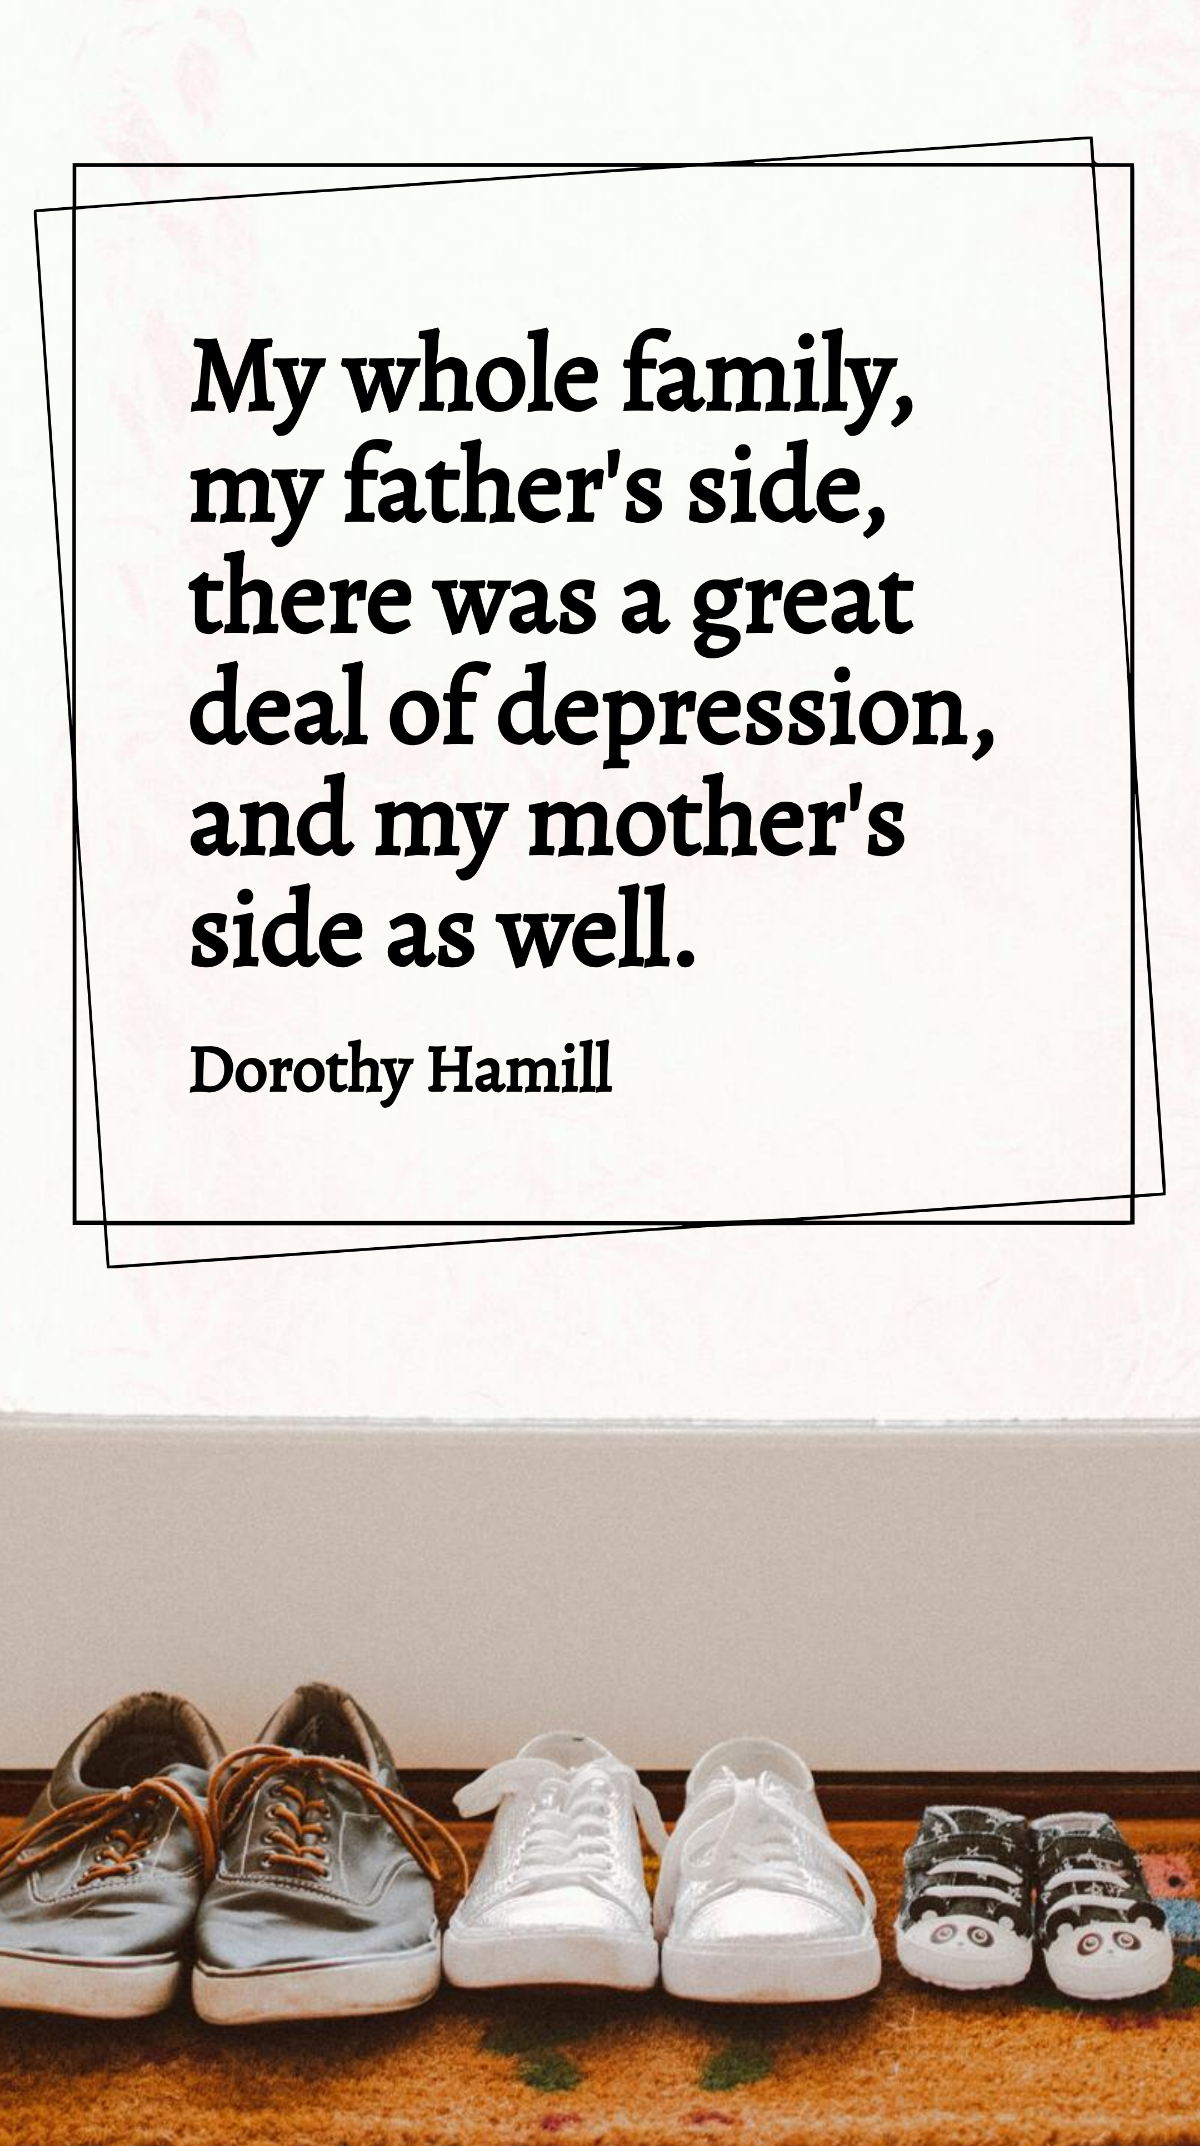 Dorothy Hamill - My whole family, my father's side, there was a great deal of depression, and my mother's side as well. Template